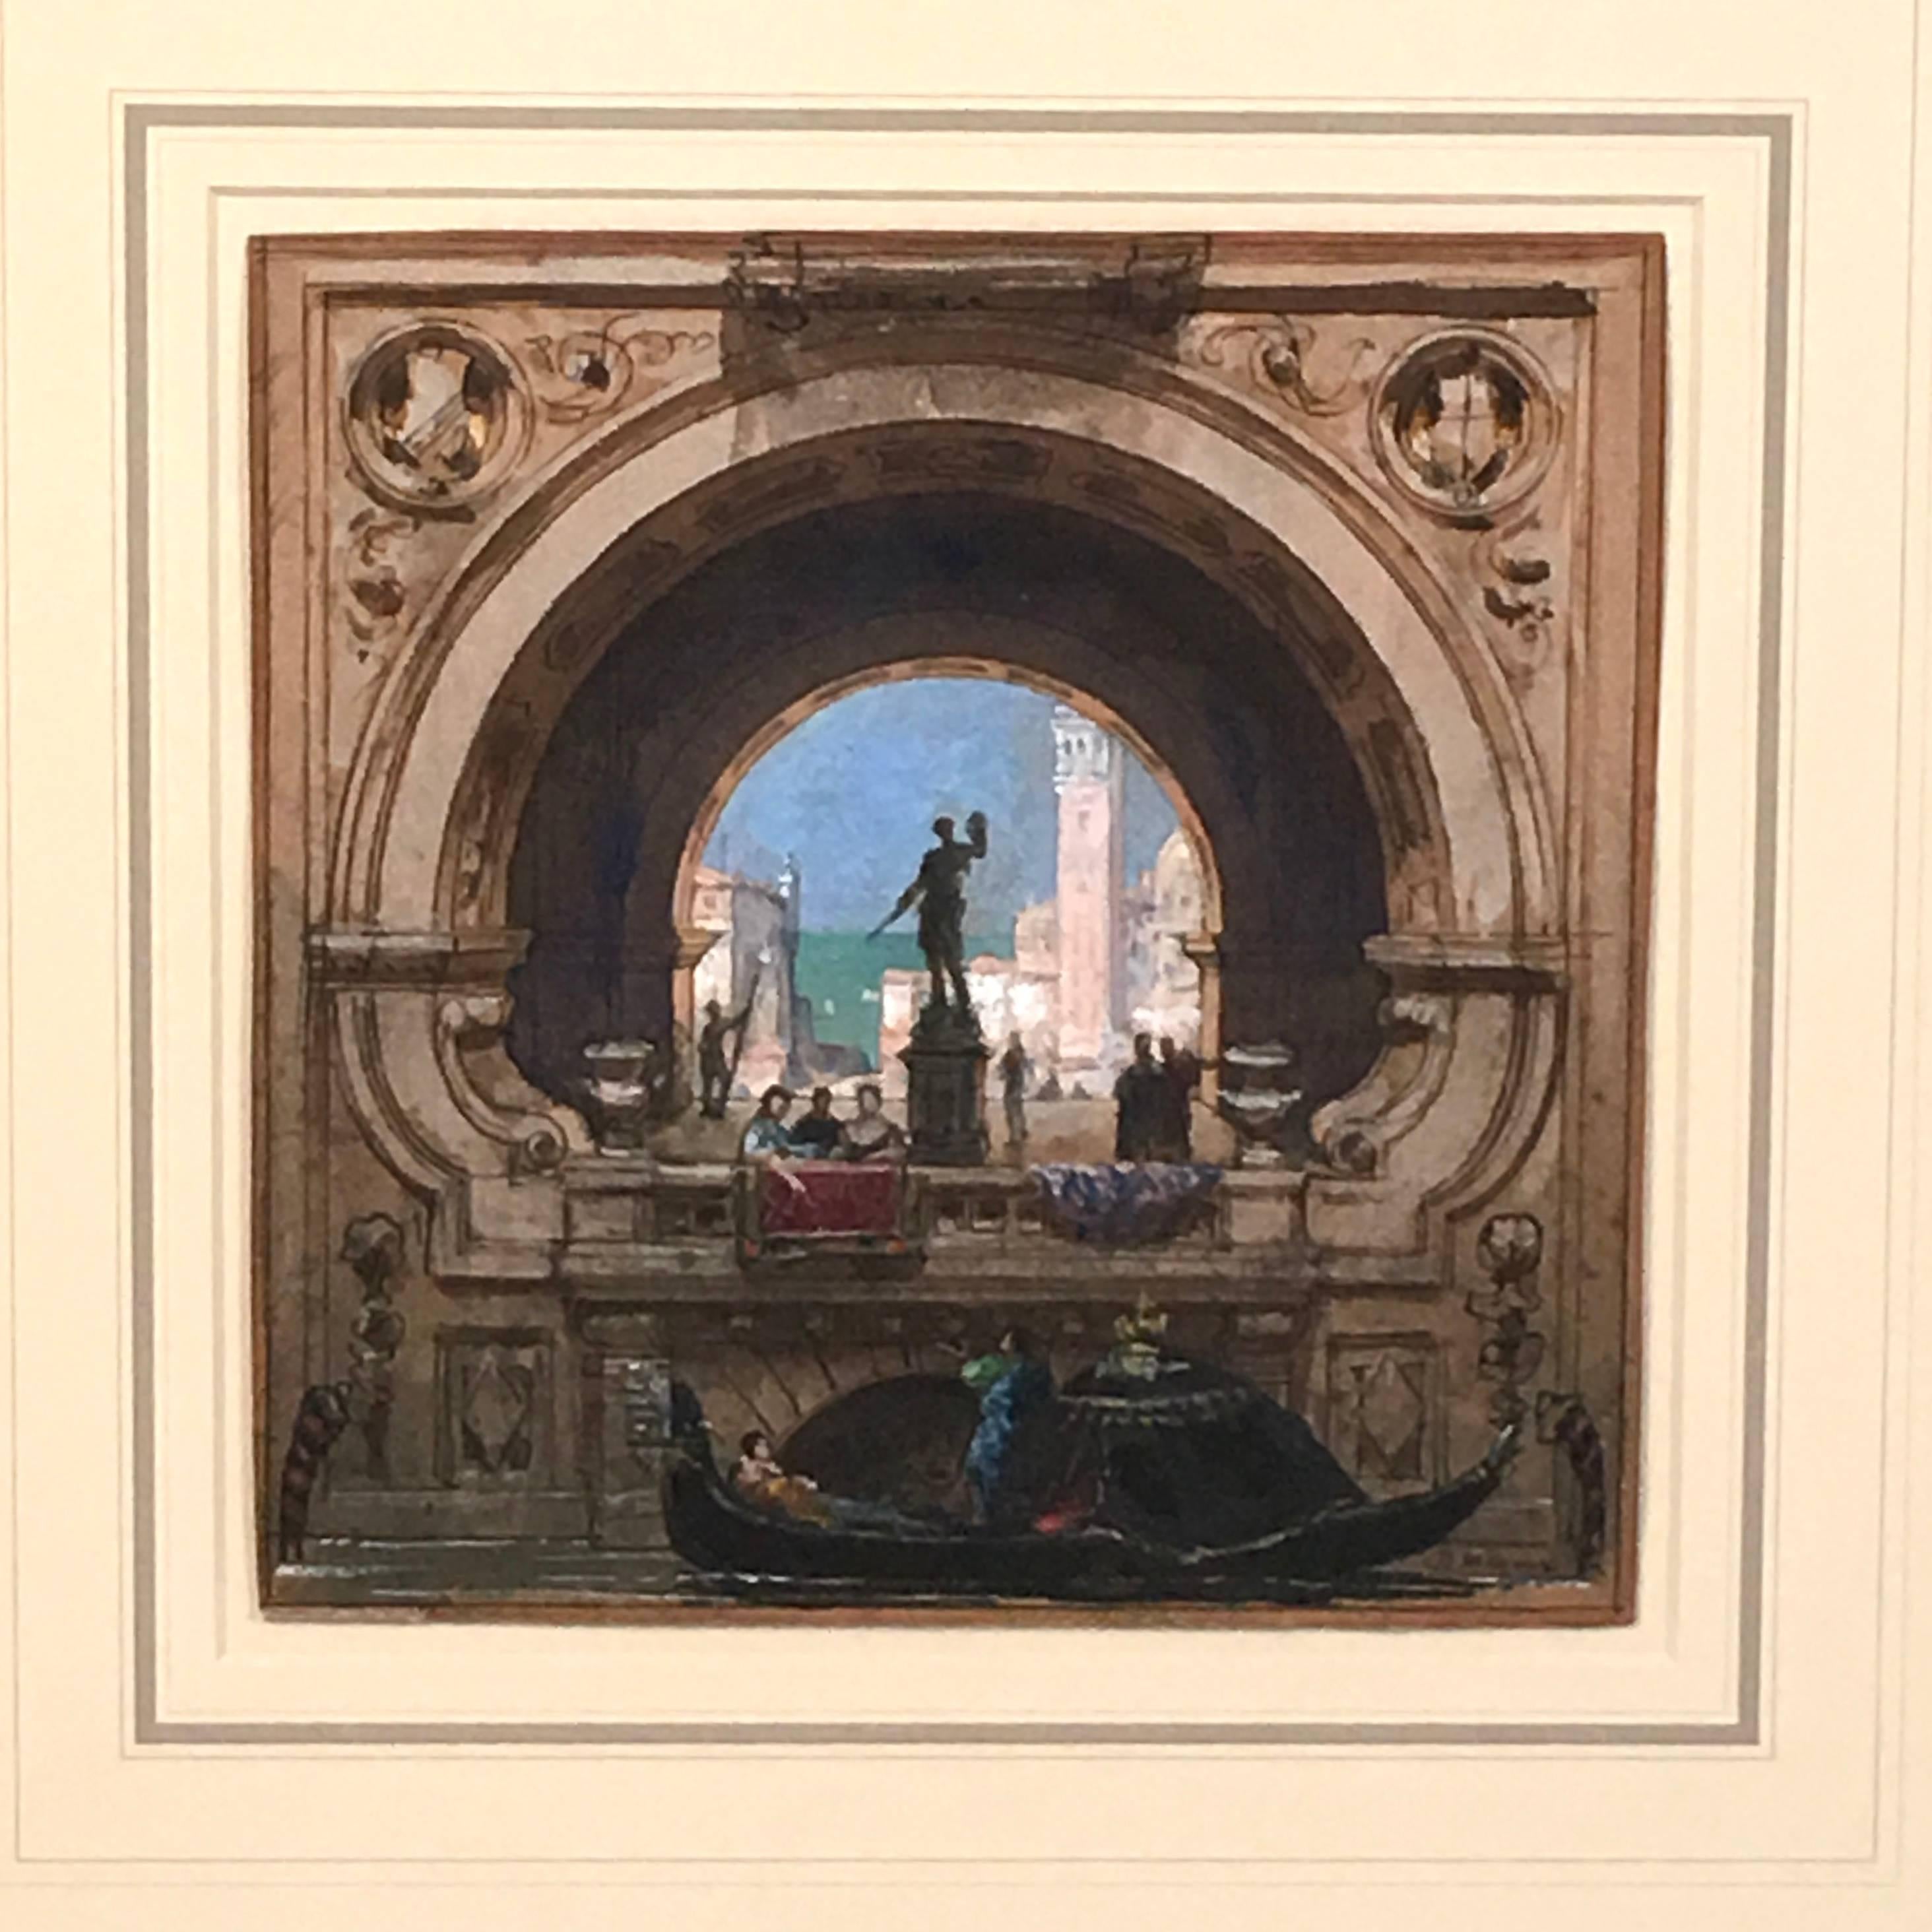 A beautifully rendered view of Venice in pastel, watercolor and pen and ink by French artist Henri Mayeux (1845-1929), depicting  a view, framed through an arch  of the campanile of St. Mark's in the distance, a sculpture on pedestal in the center